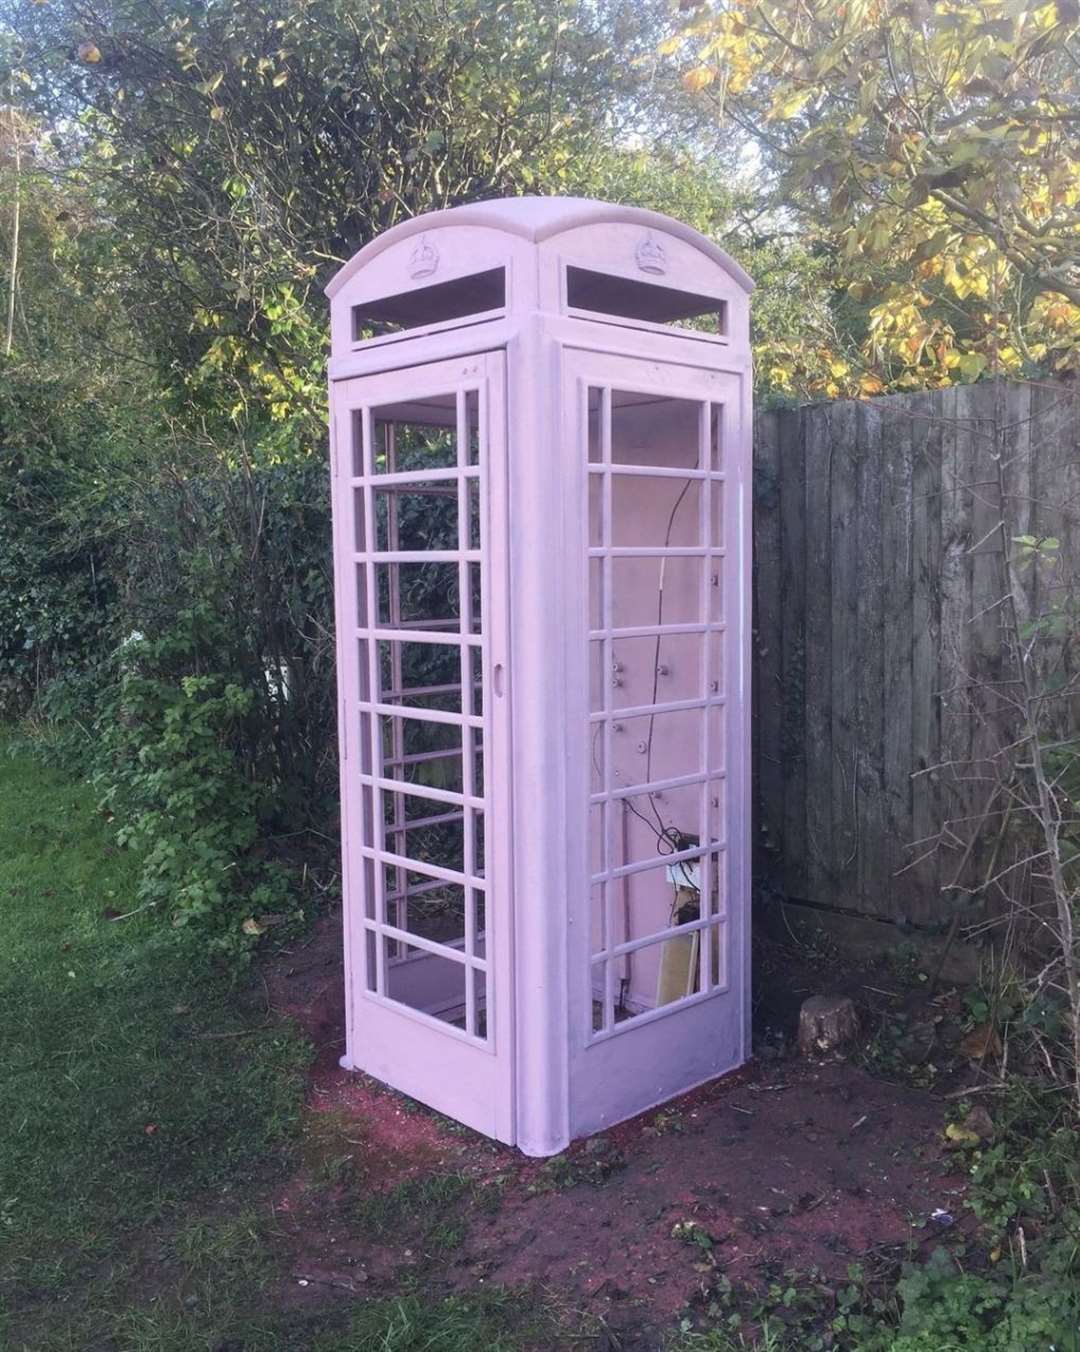 It was temporarily turned pink before the red paint was revamped. Picture: The Rolvenden Layne Sound Museum